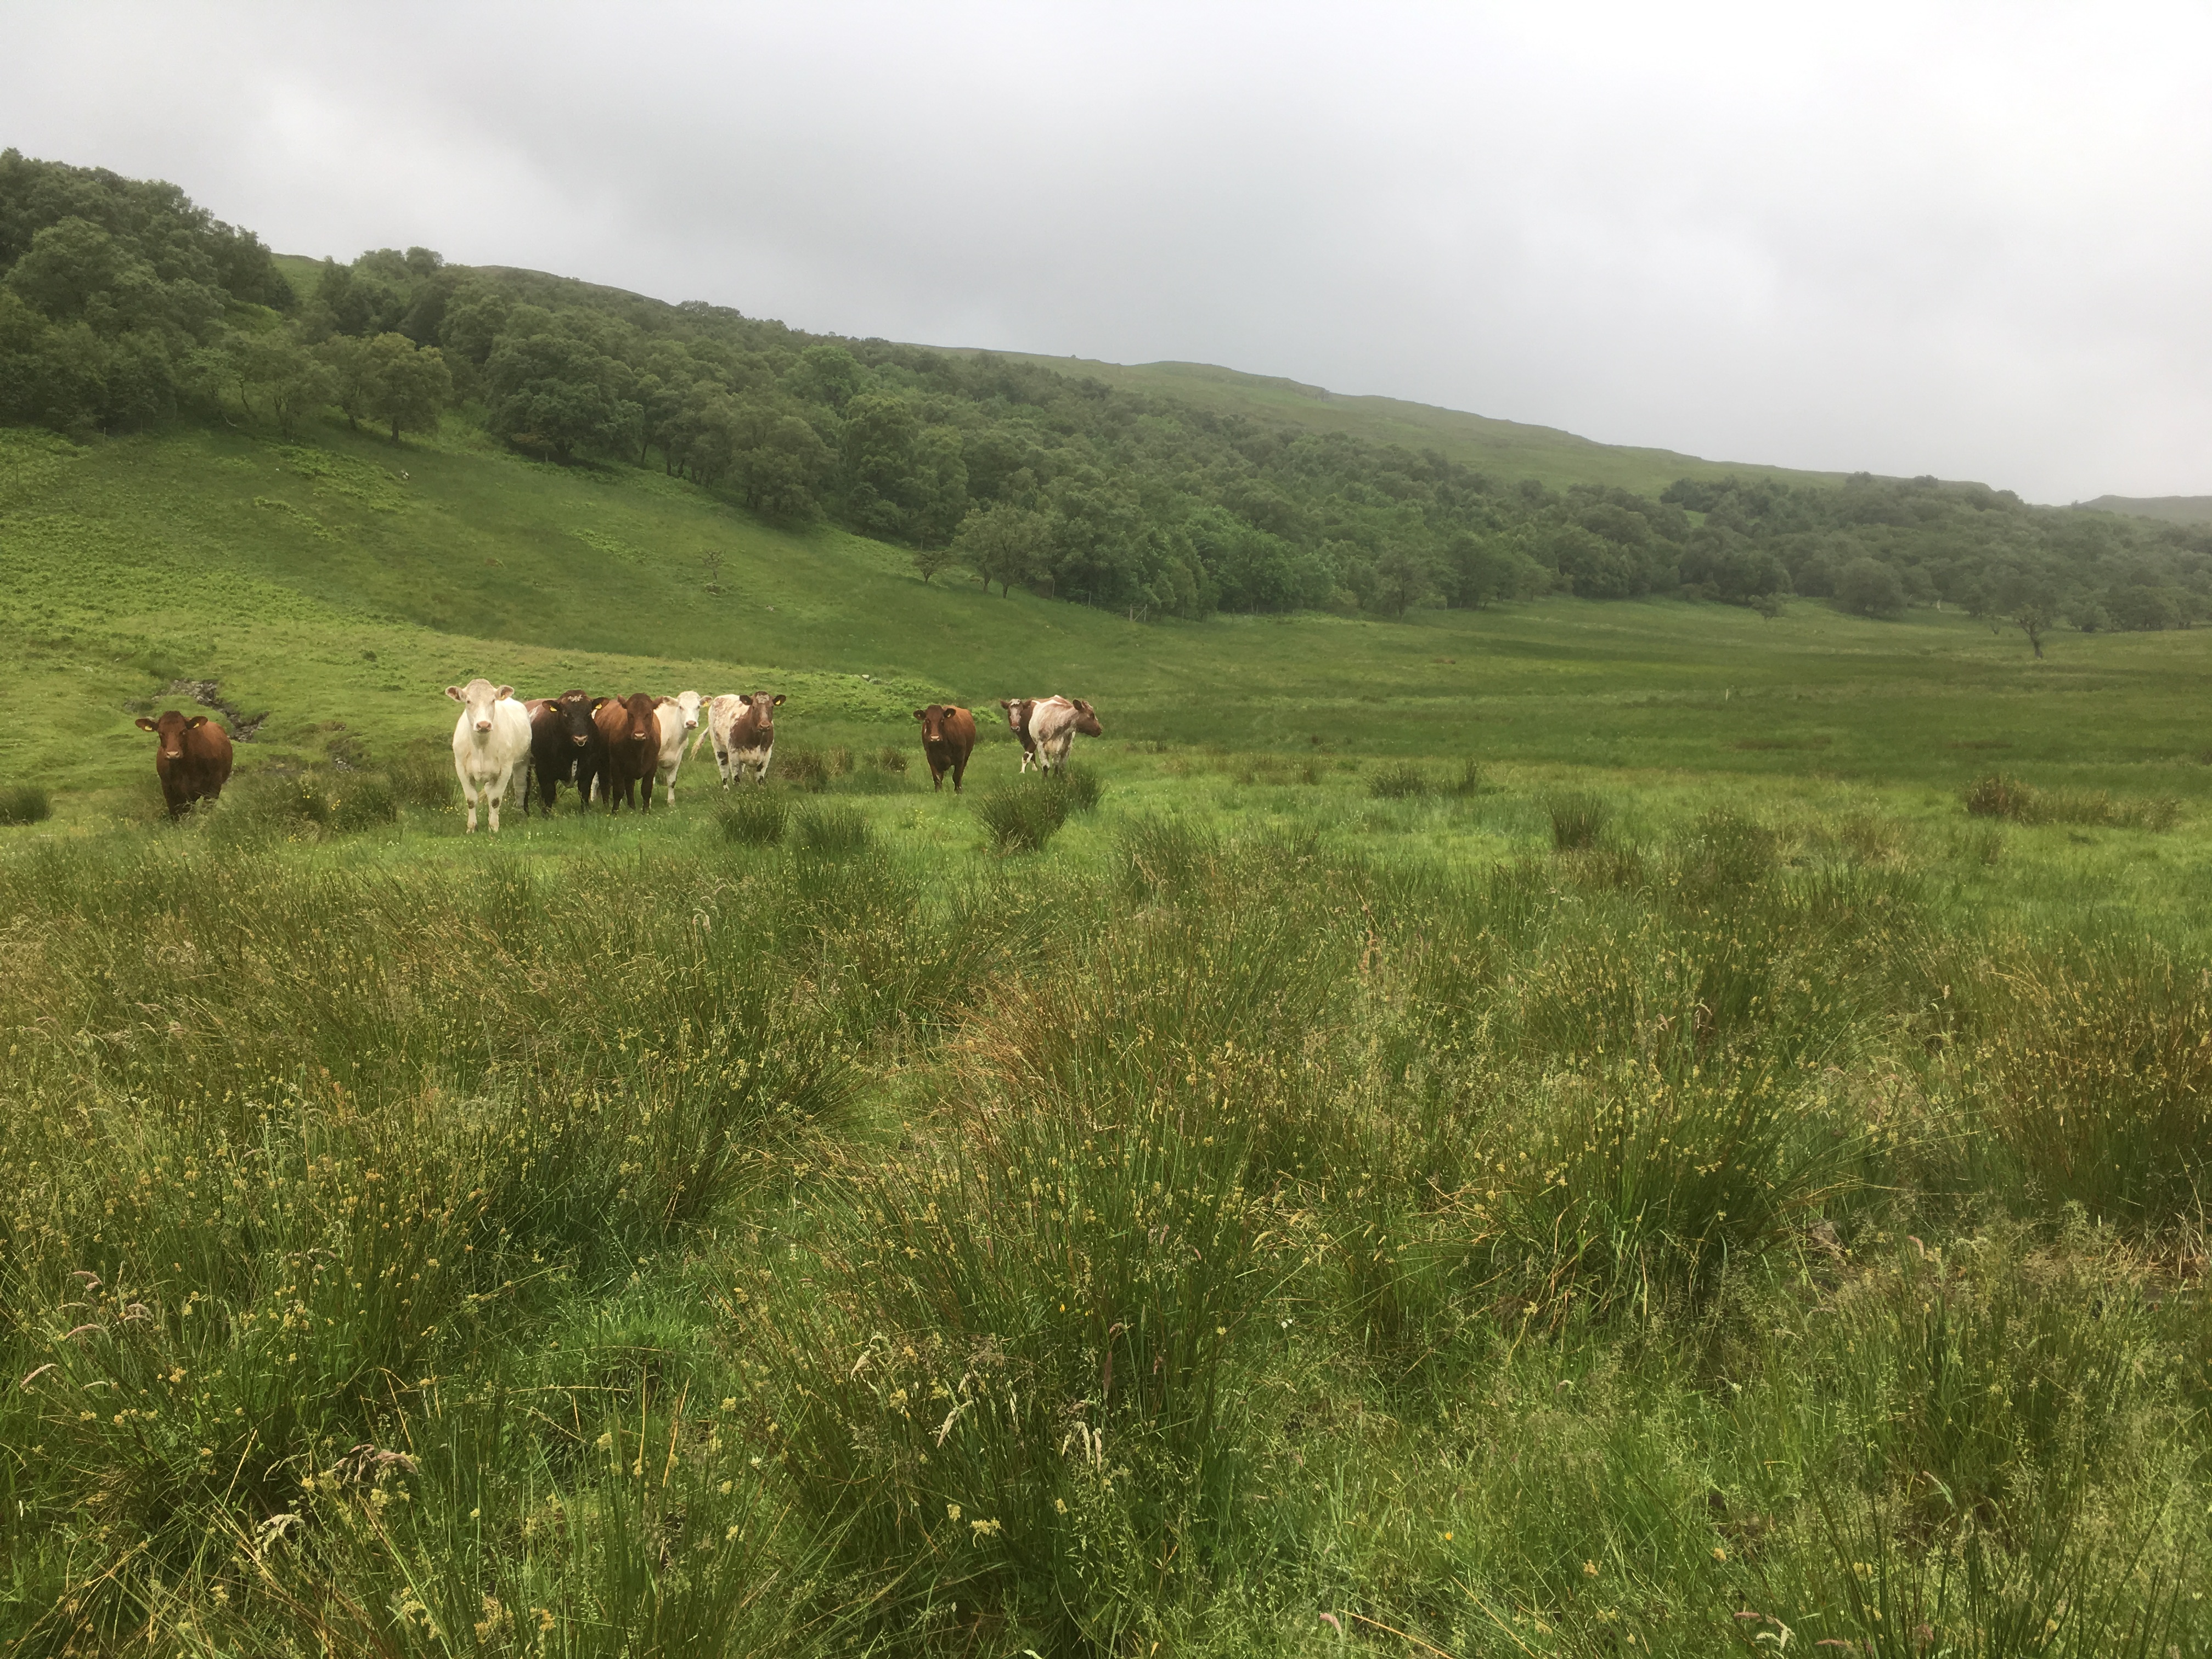 Rushy grassland and light cattle grazing at RSPB Haweswater (Alastair Driver/Rewilding Britain/PA)